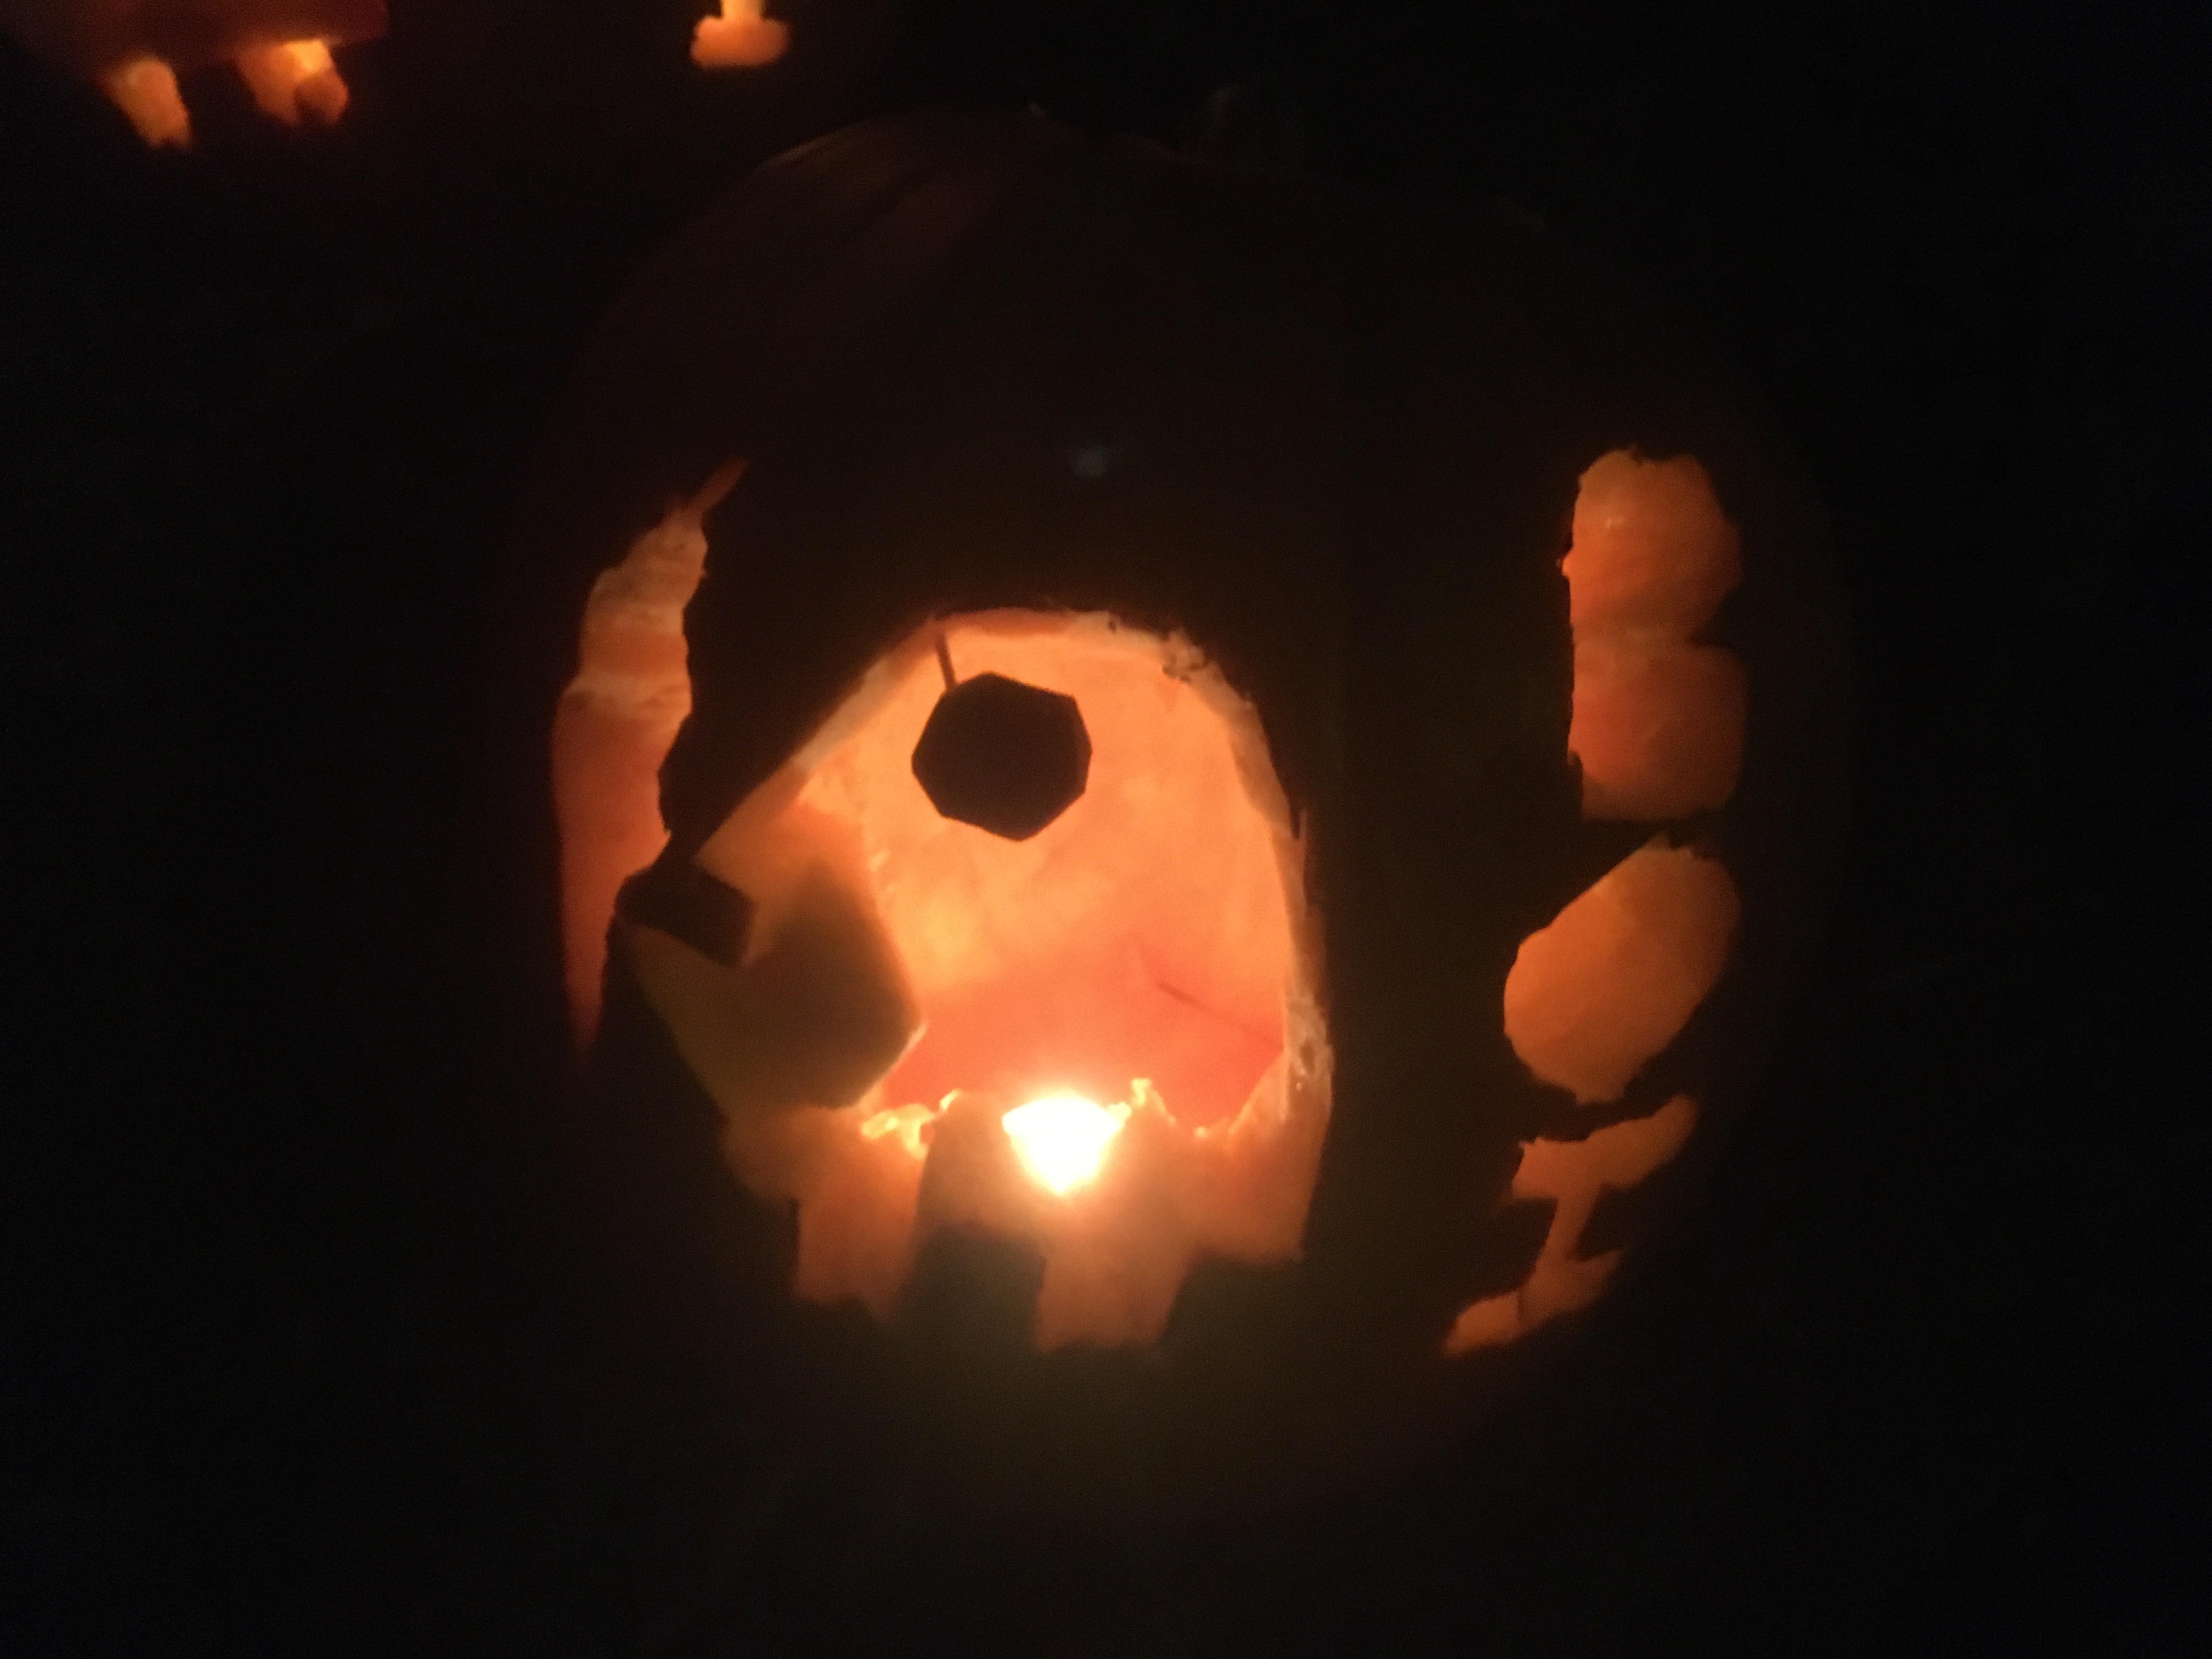 Carved into the pumpkin is an penguin holding an ice-cream cone, next to the word BOI.